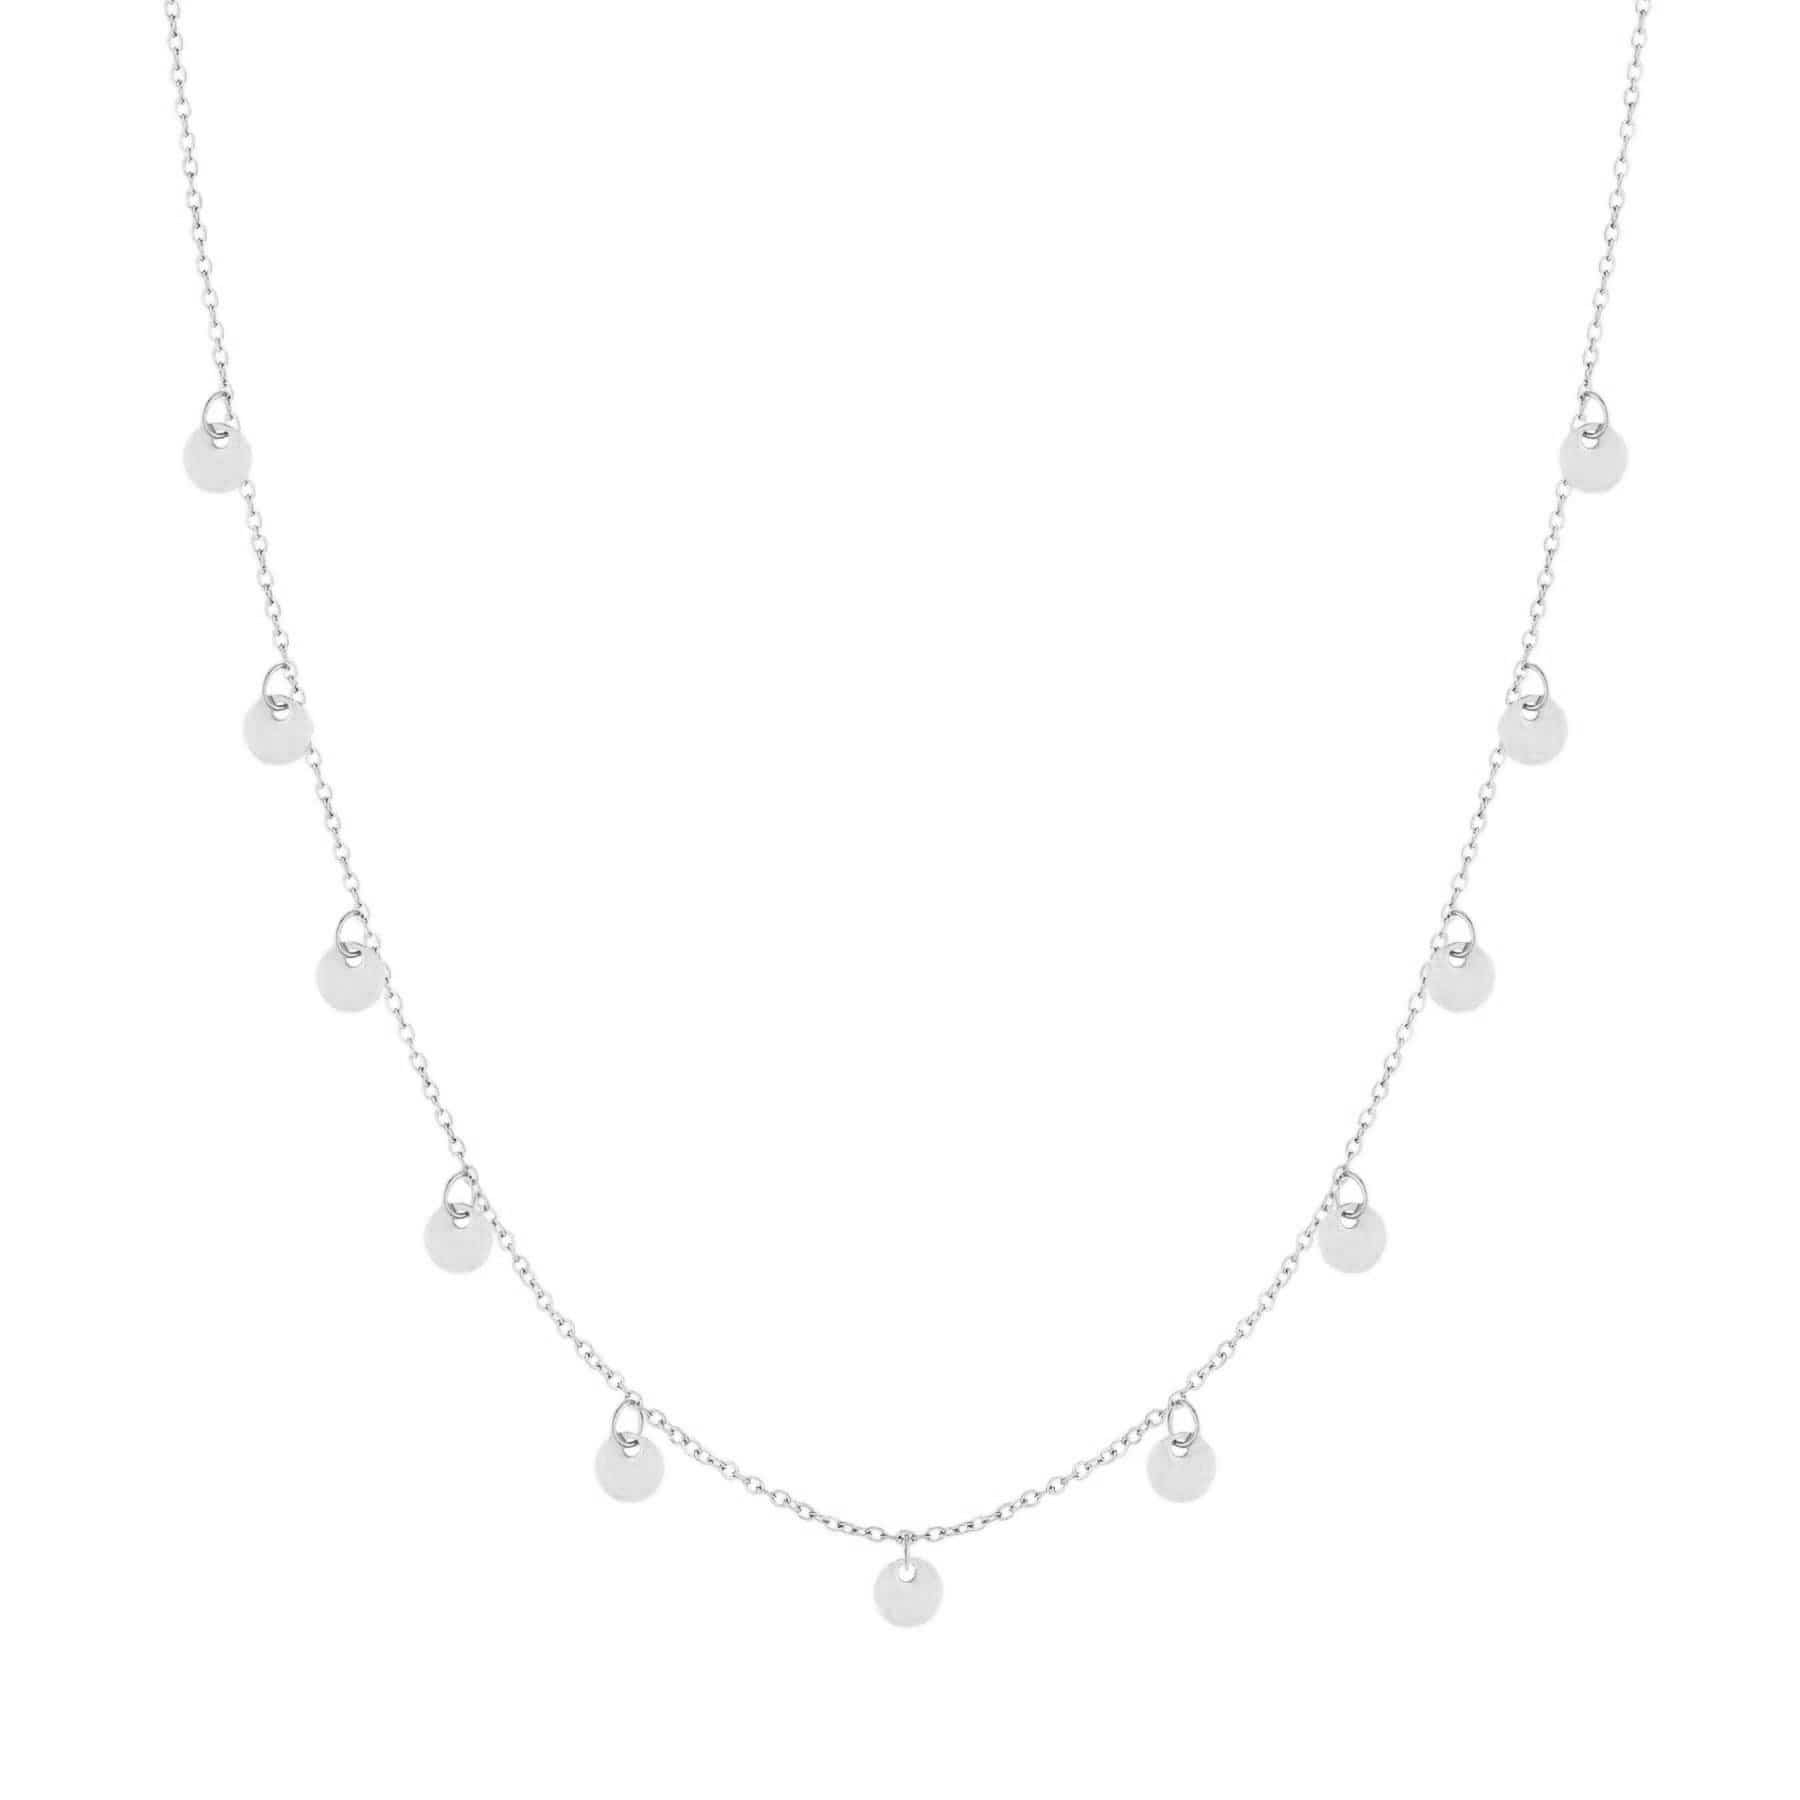 BohoMoon Stainless Steel Disc Necklace Silver